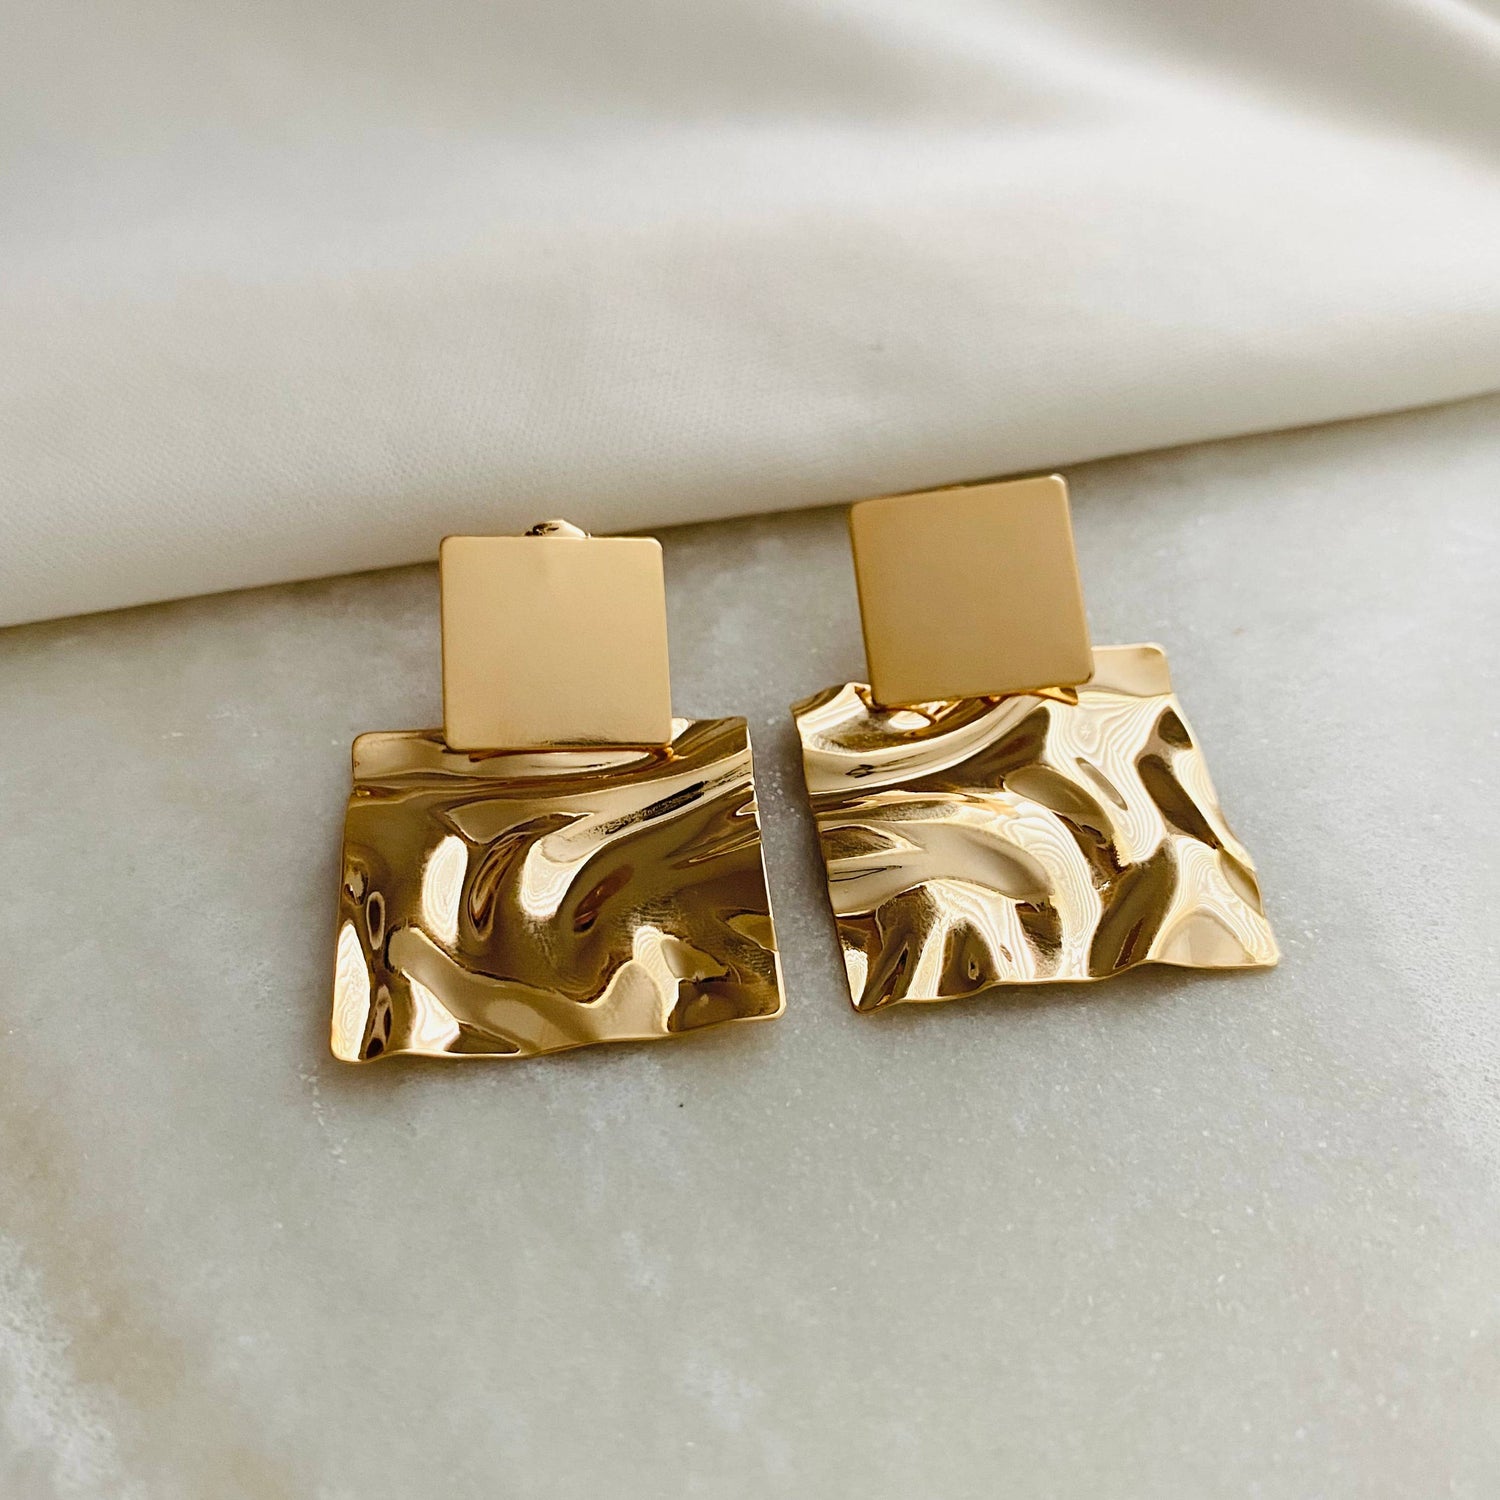 a pair of gold square shaped earrings on a white surface